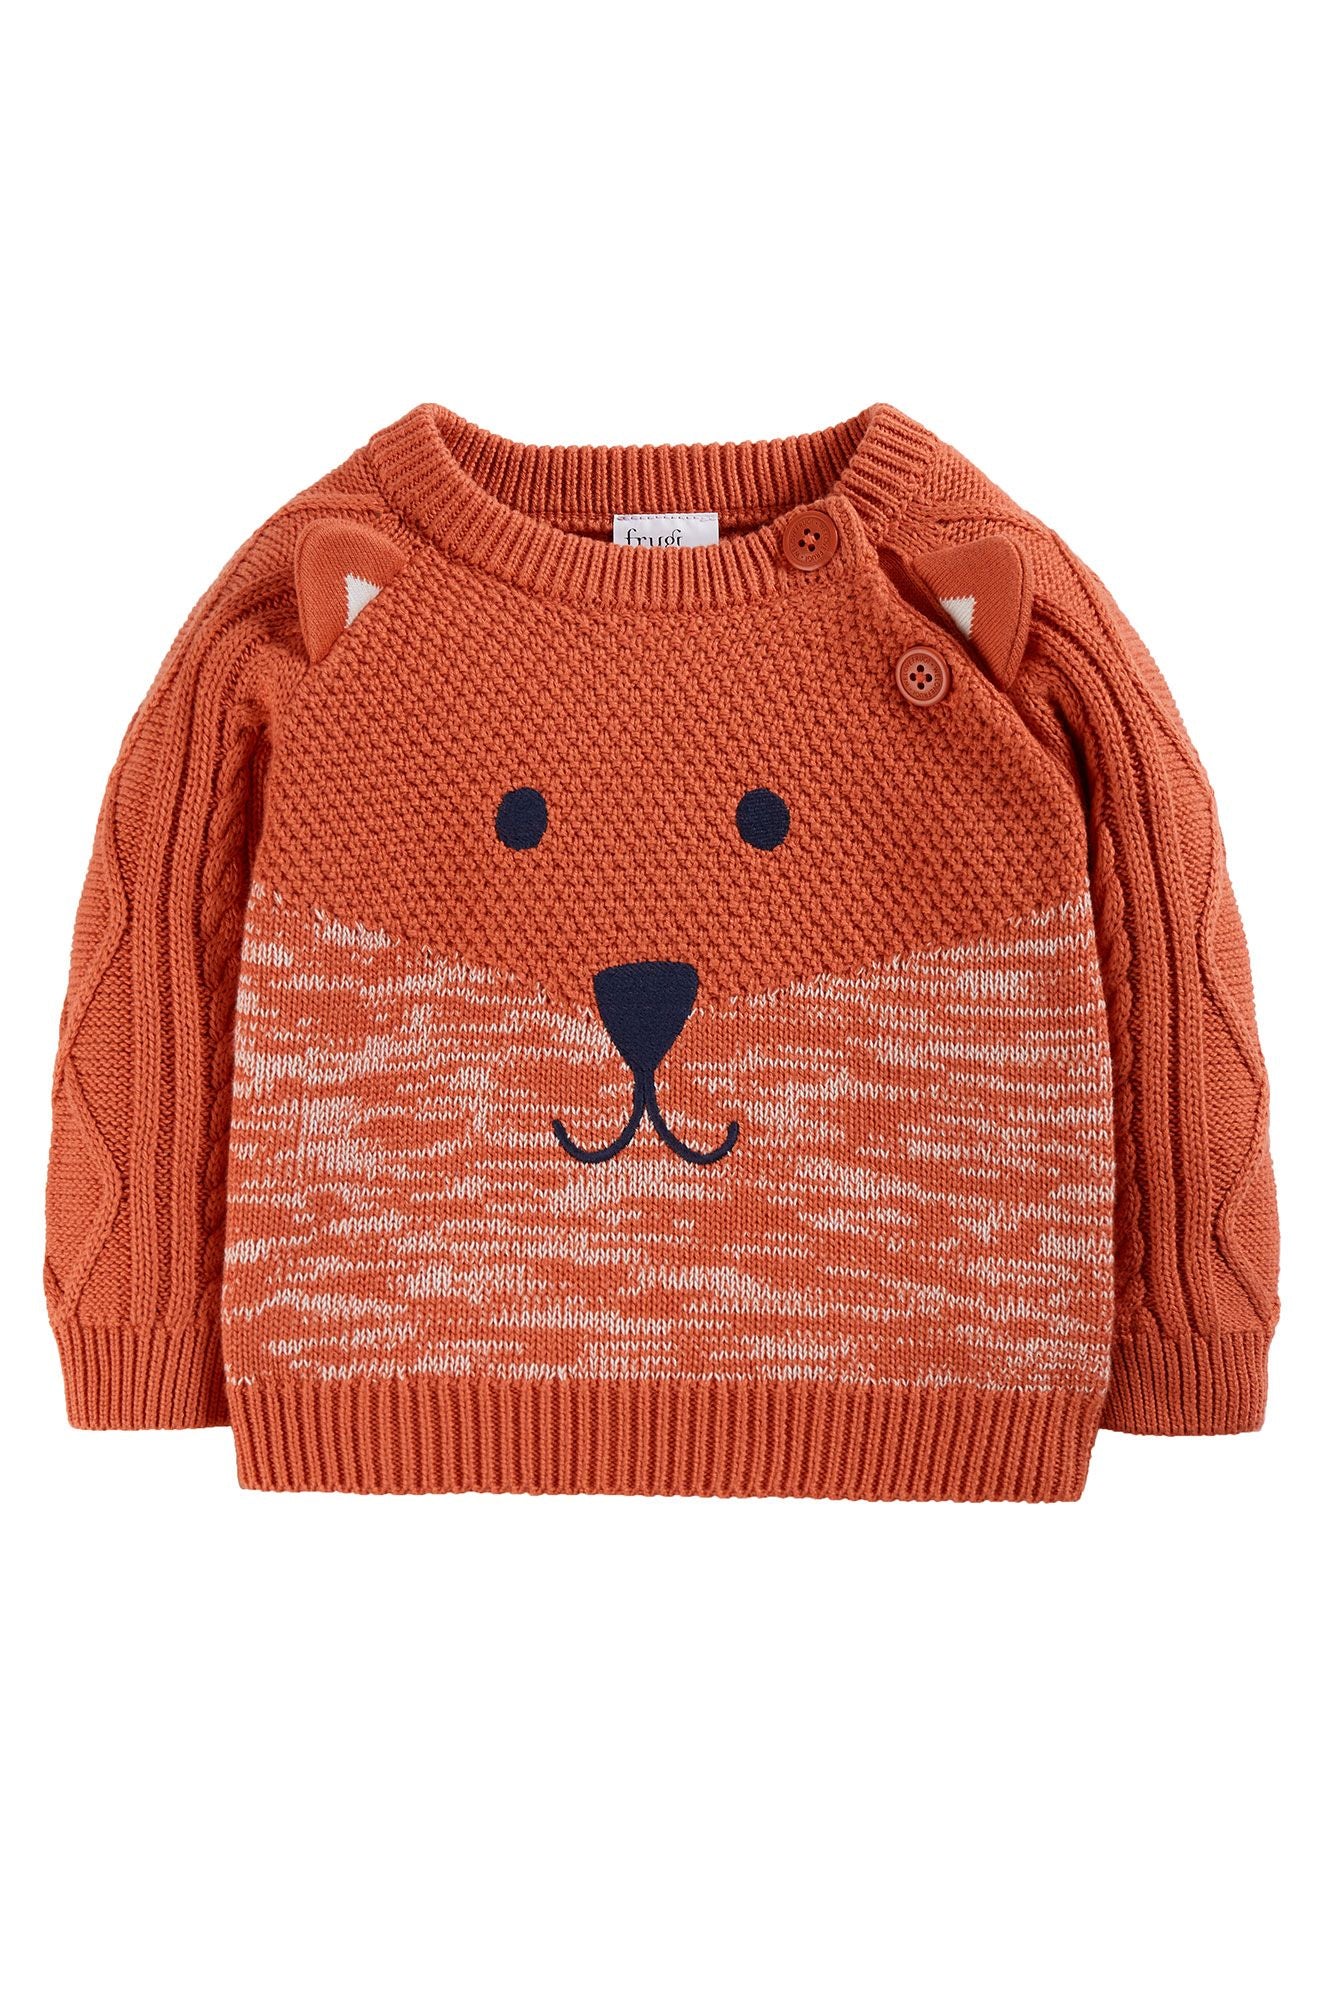 Frugi Caleb Character Knitted Jumper